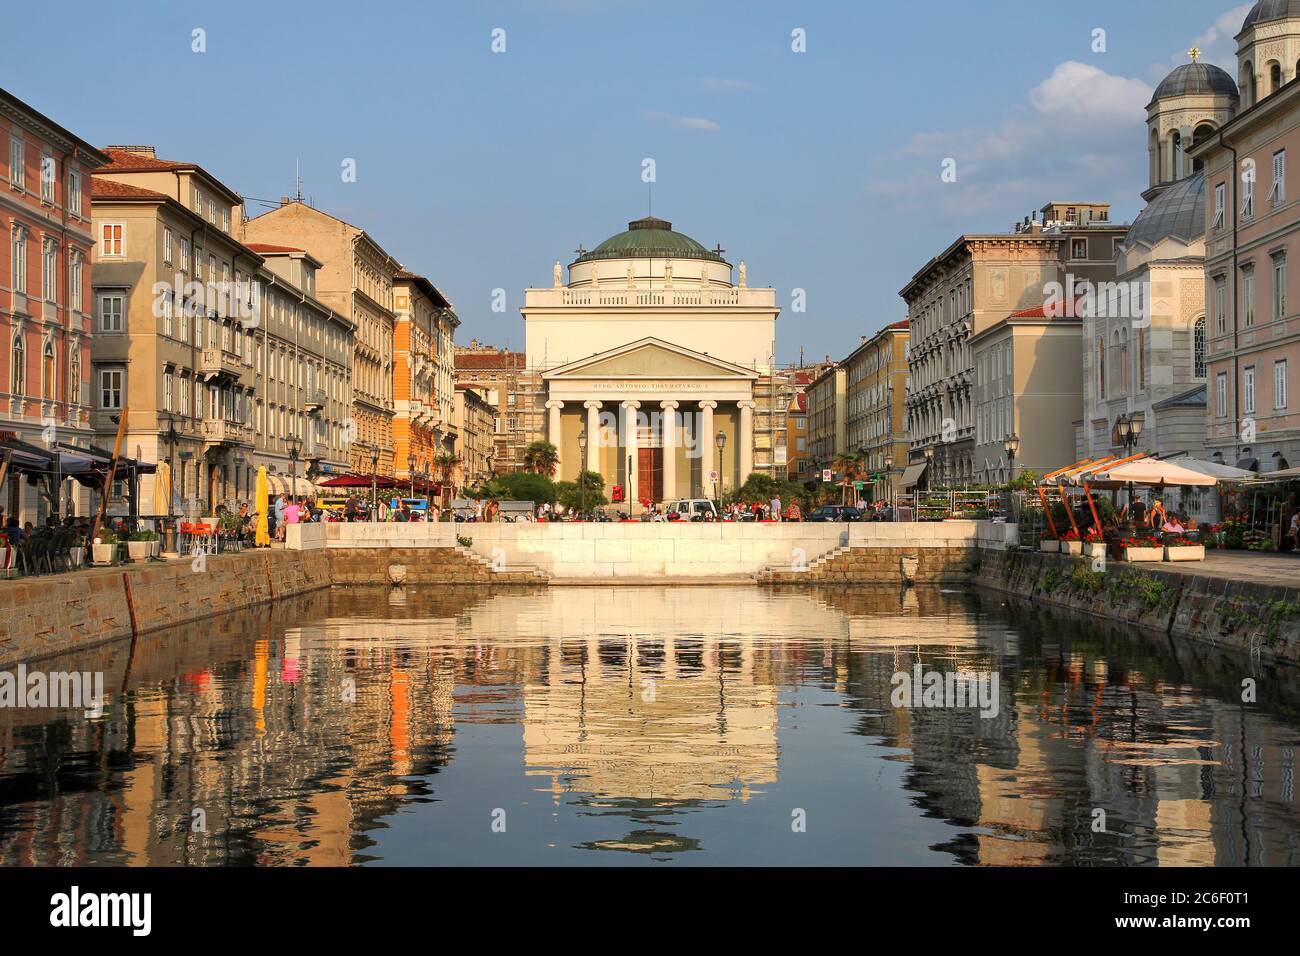 Scenic view of the Canal Grande in Trieste, Italy bathing in the late afternoon sun in a lazy summer day. Stock Photo